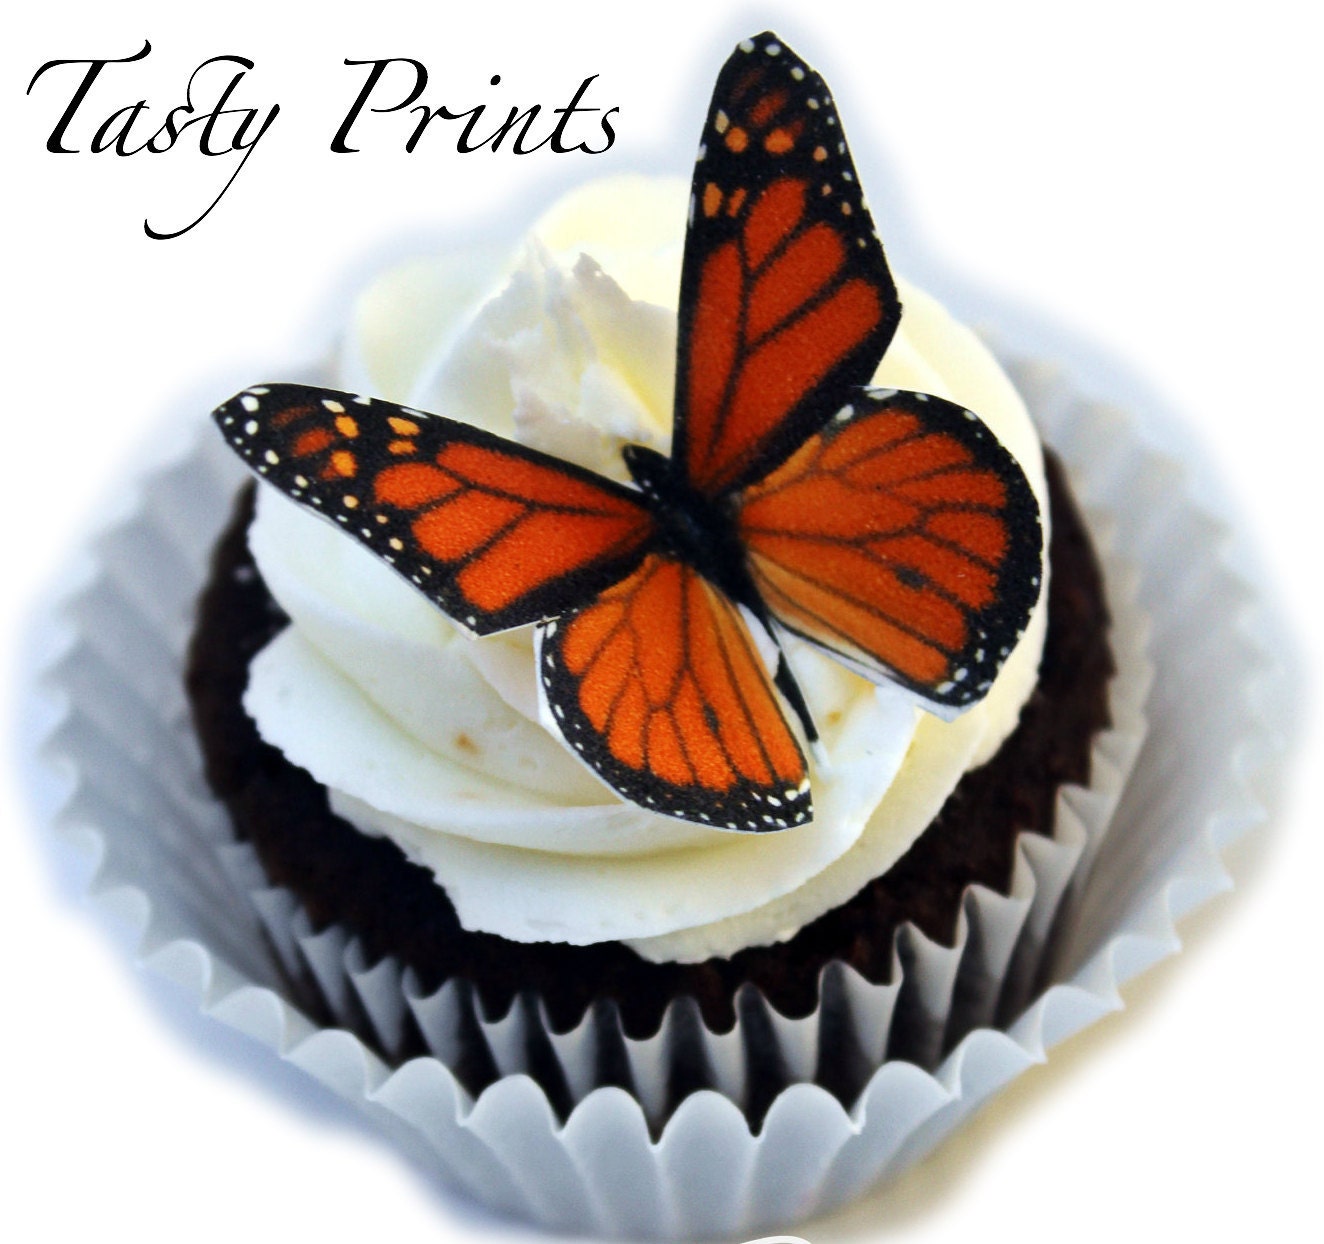 Edible Monarch Butterfly HD Tasty Print Cupcake Topper Cake Decoration 